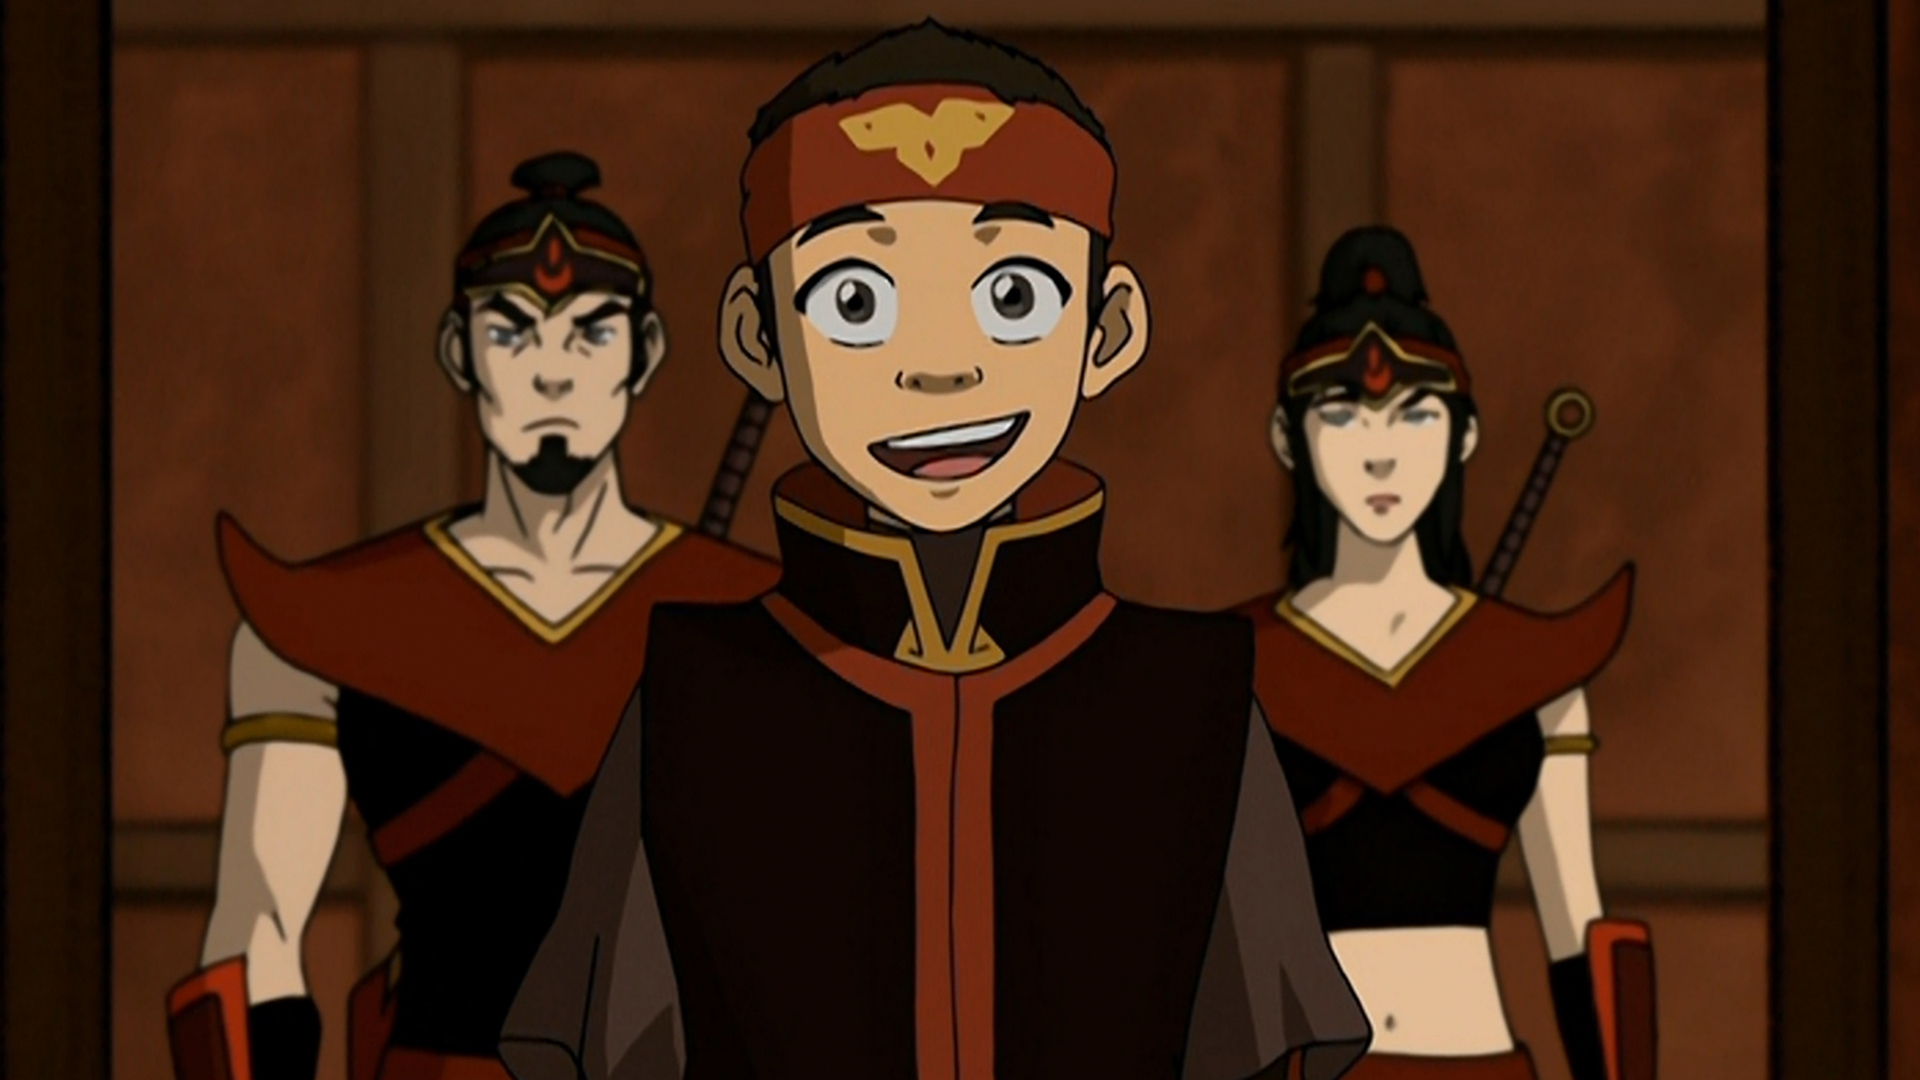 Fire Nation Aang by SpiderCookiee on DeviantArt